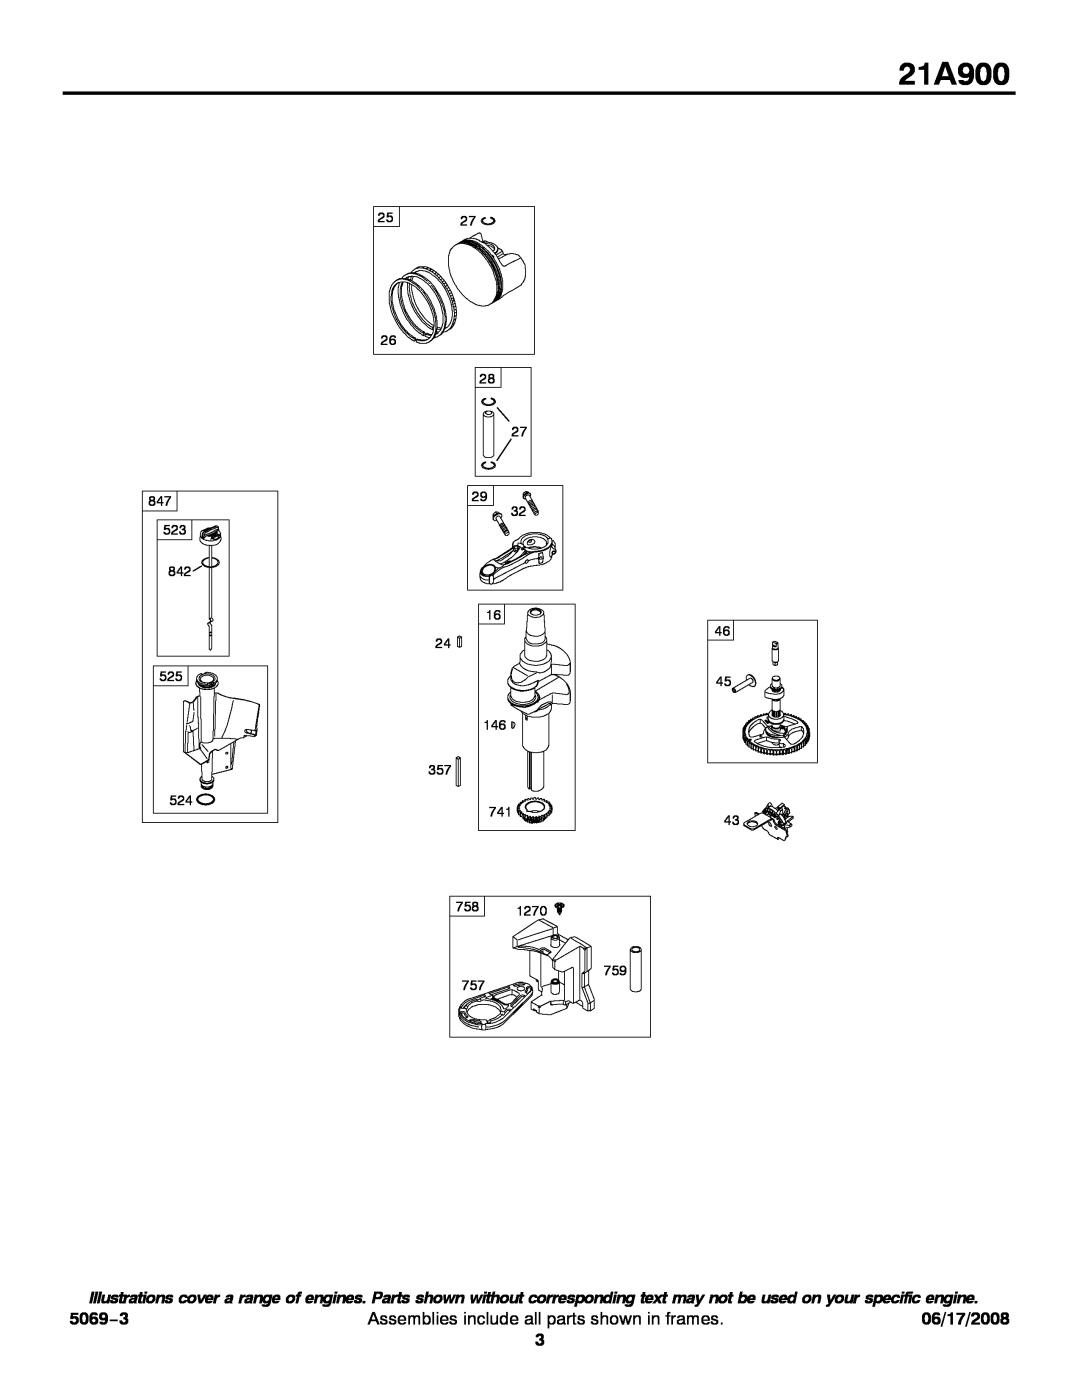 Briggs & Stratton 21A900 service manual 5069−3, Assemblies include all parts shown in frames, 06/17/2008 